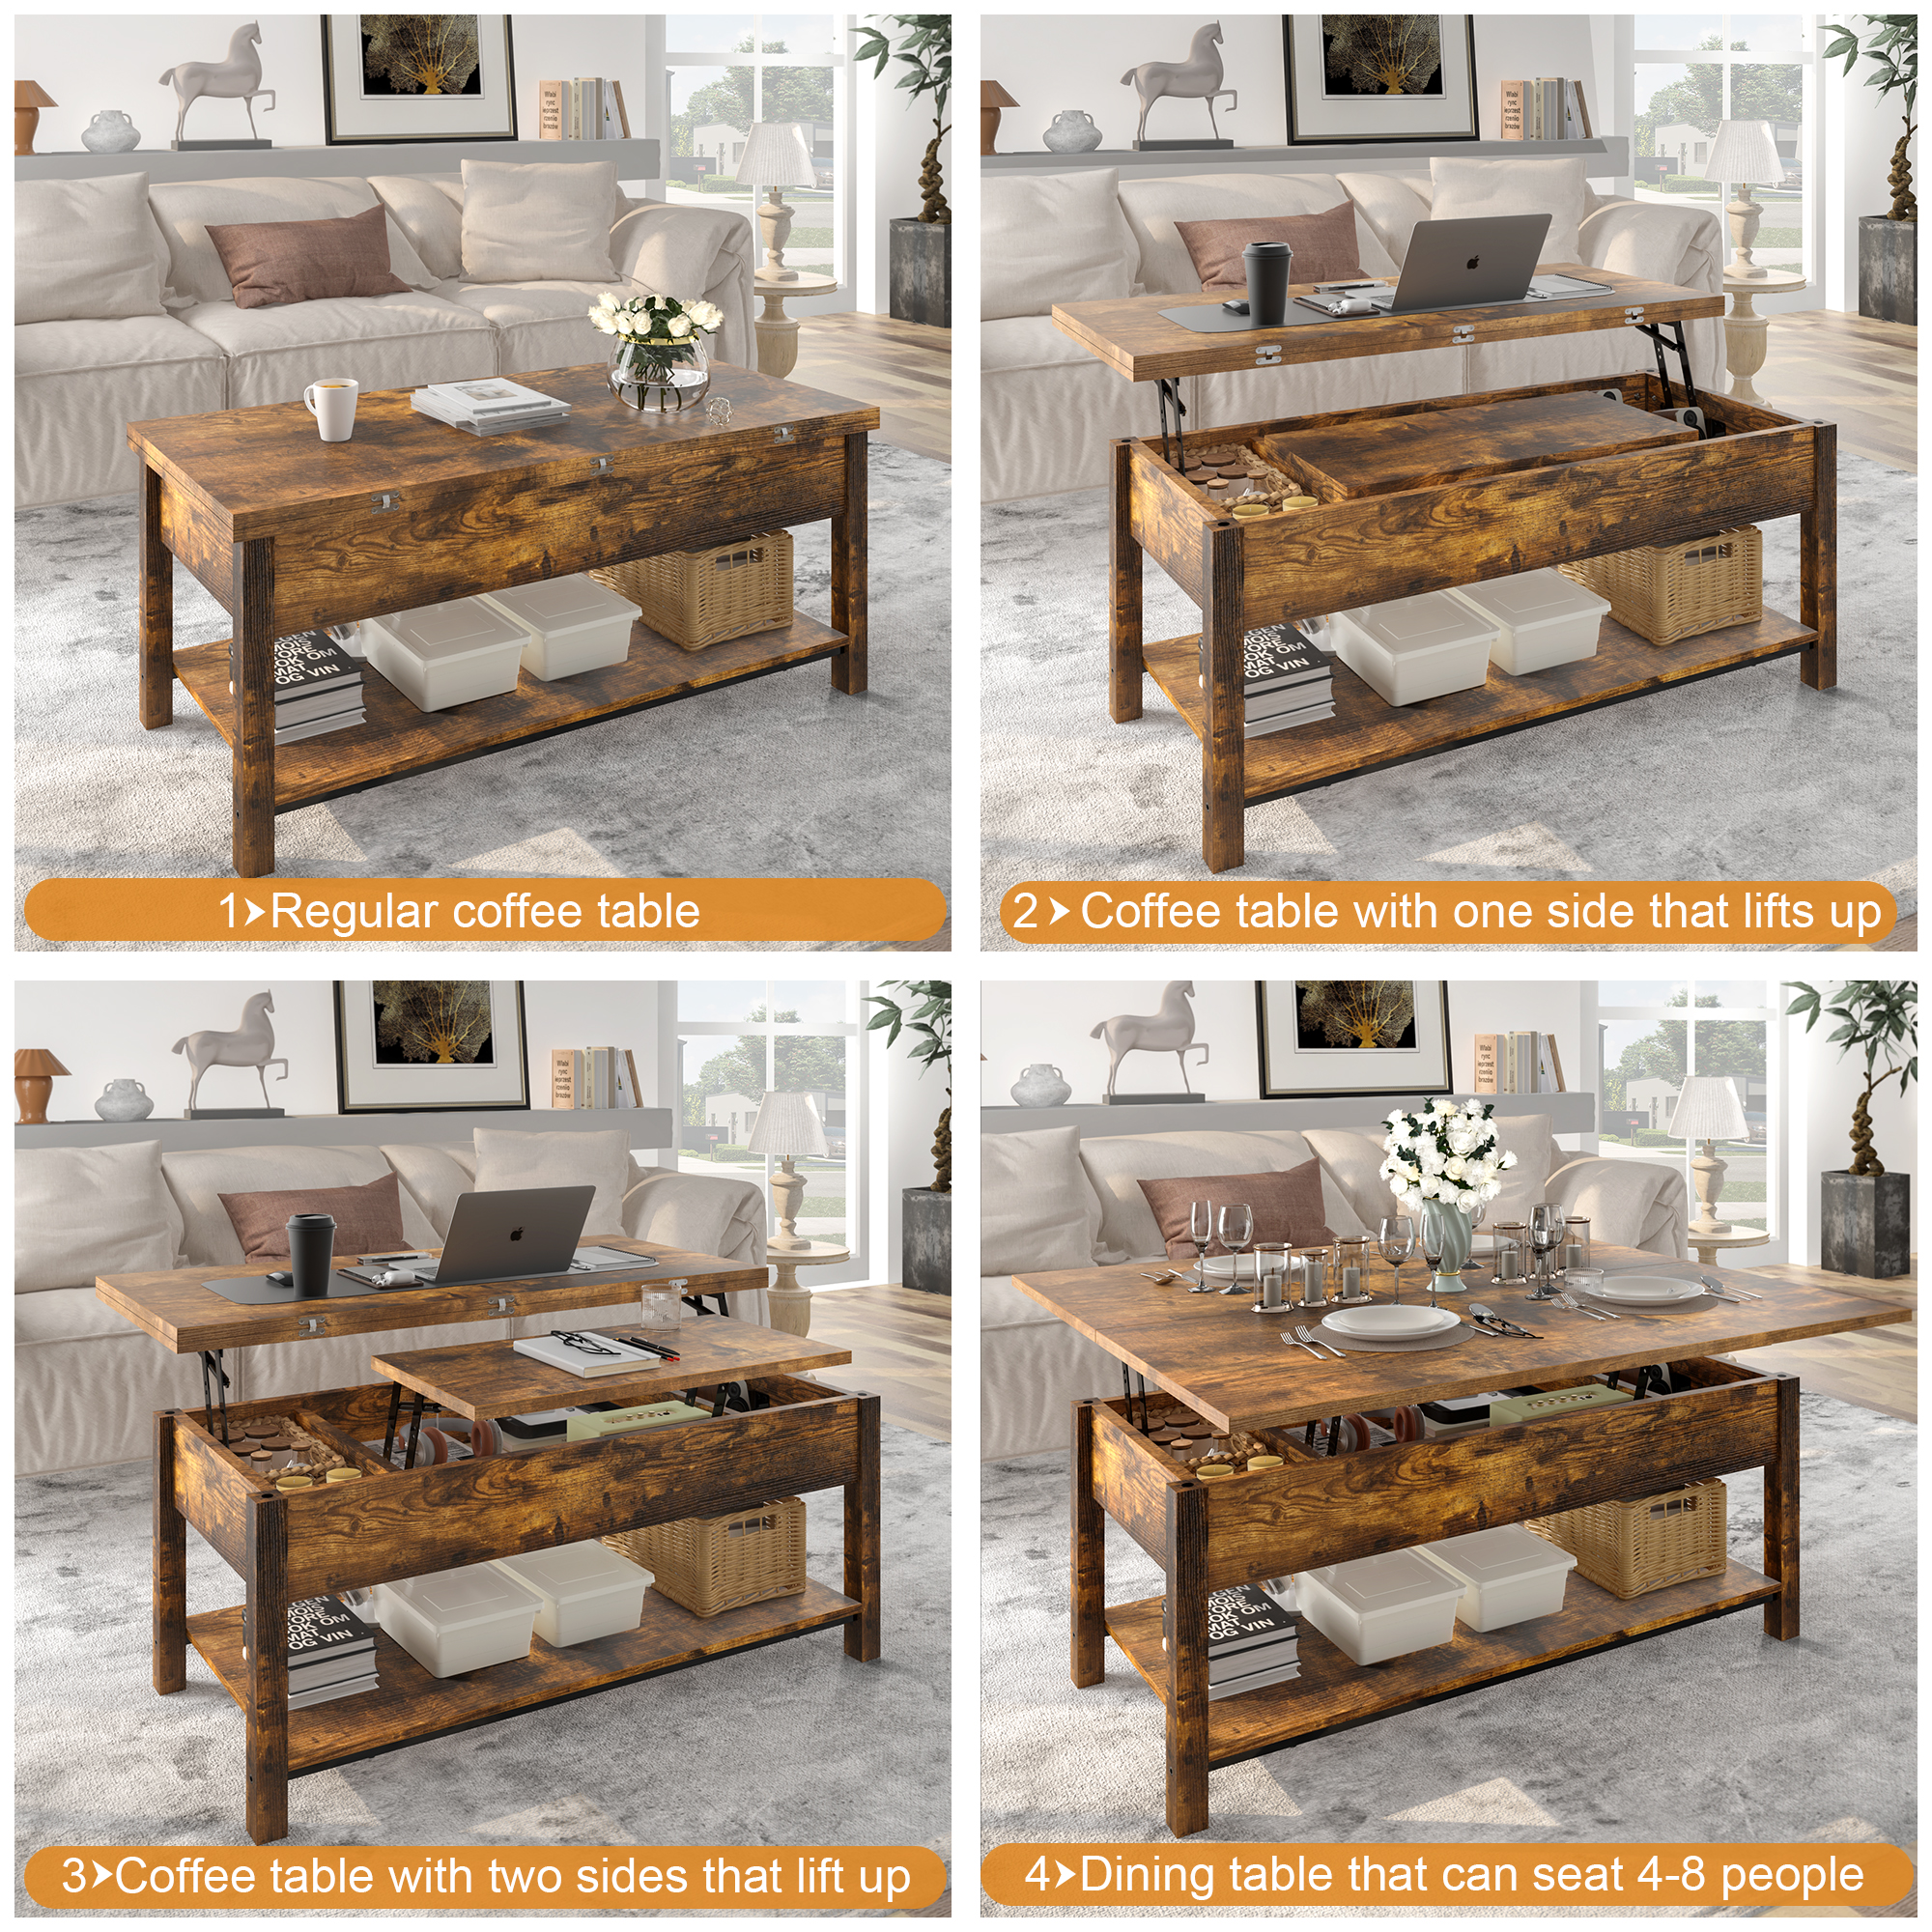 GUNAITO 41.73"Lift Top Coffee Table 4 in 1 Multi-Function Convertible Coffee Table with Hidden Storage Framhouse Coffee Table for Living Room Rustic Brown - image 2 of 8